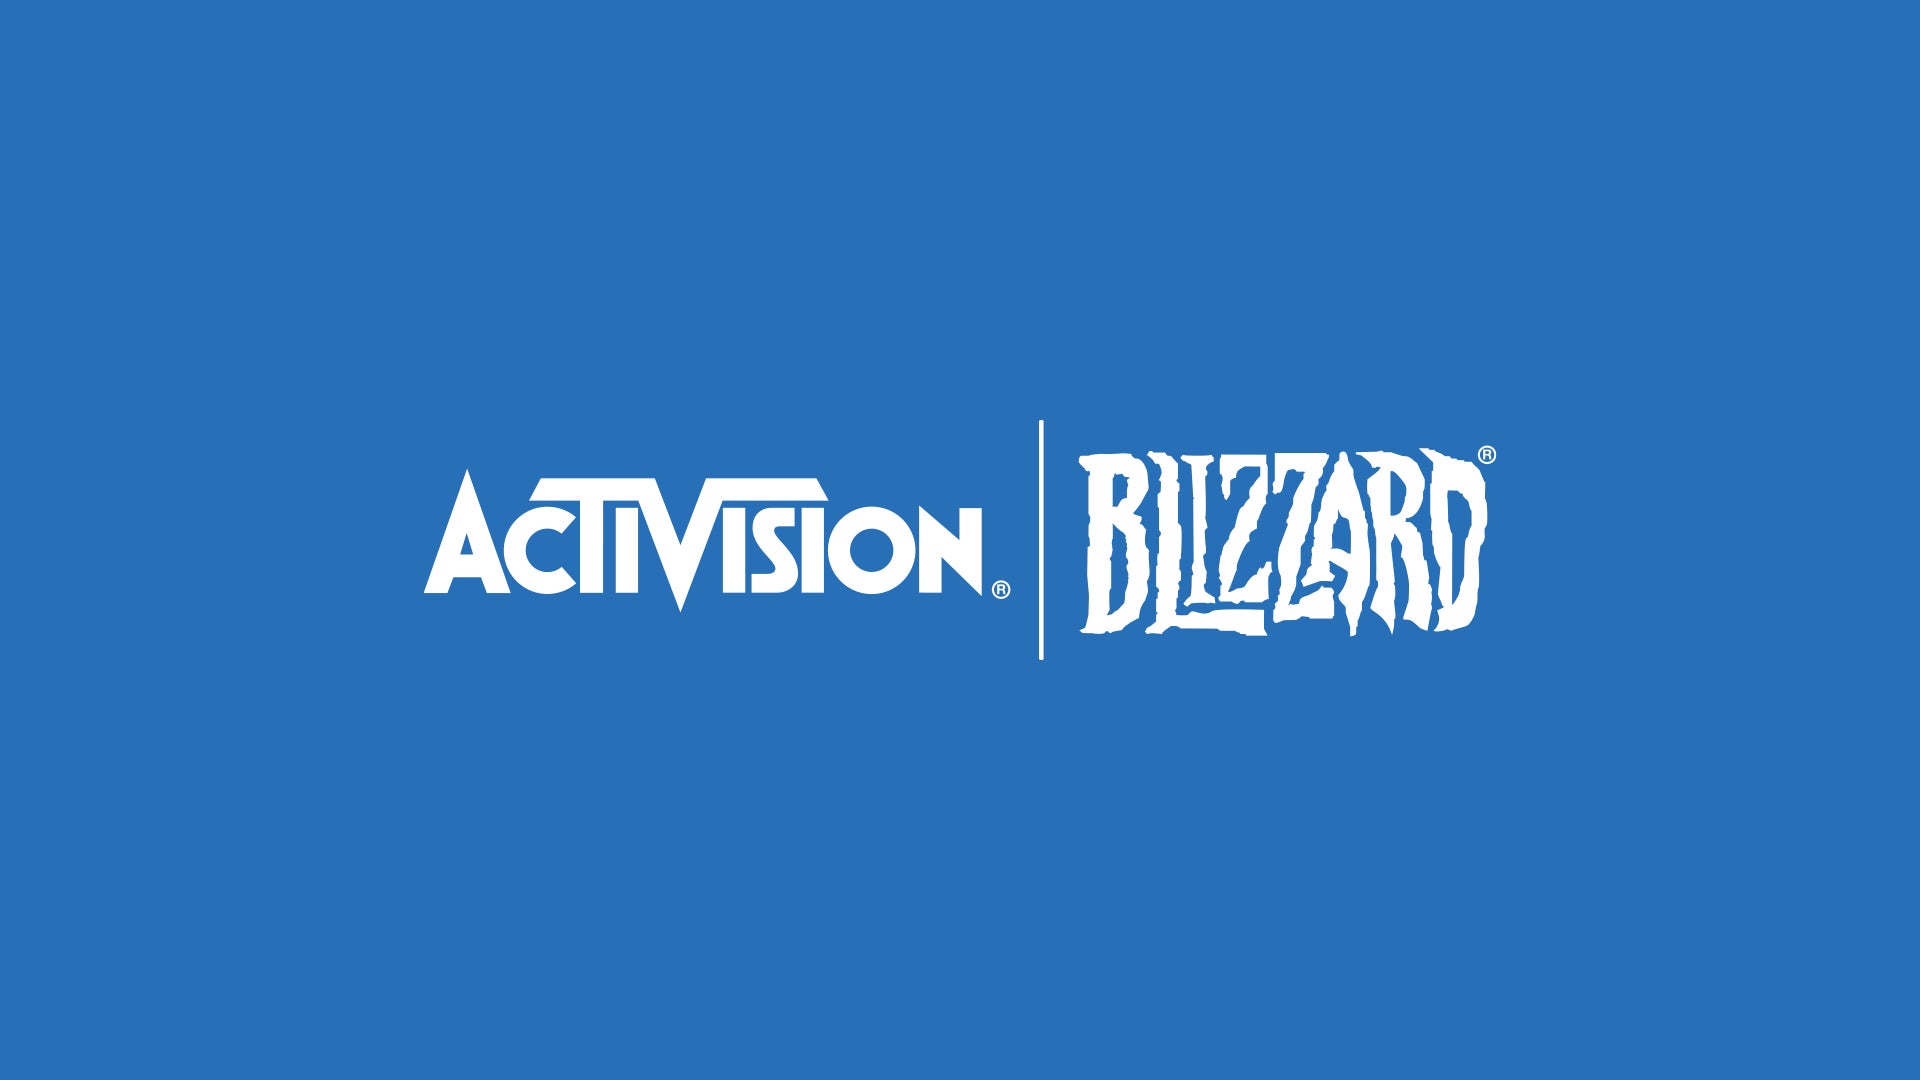 Image for Activision Blizzard makes promises for pay equity and greater diversity, hedges against expectations